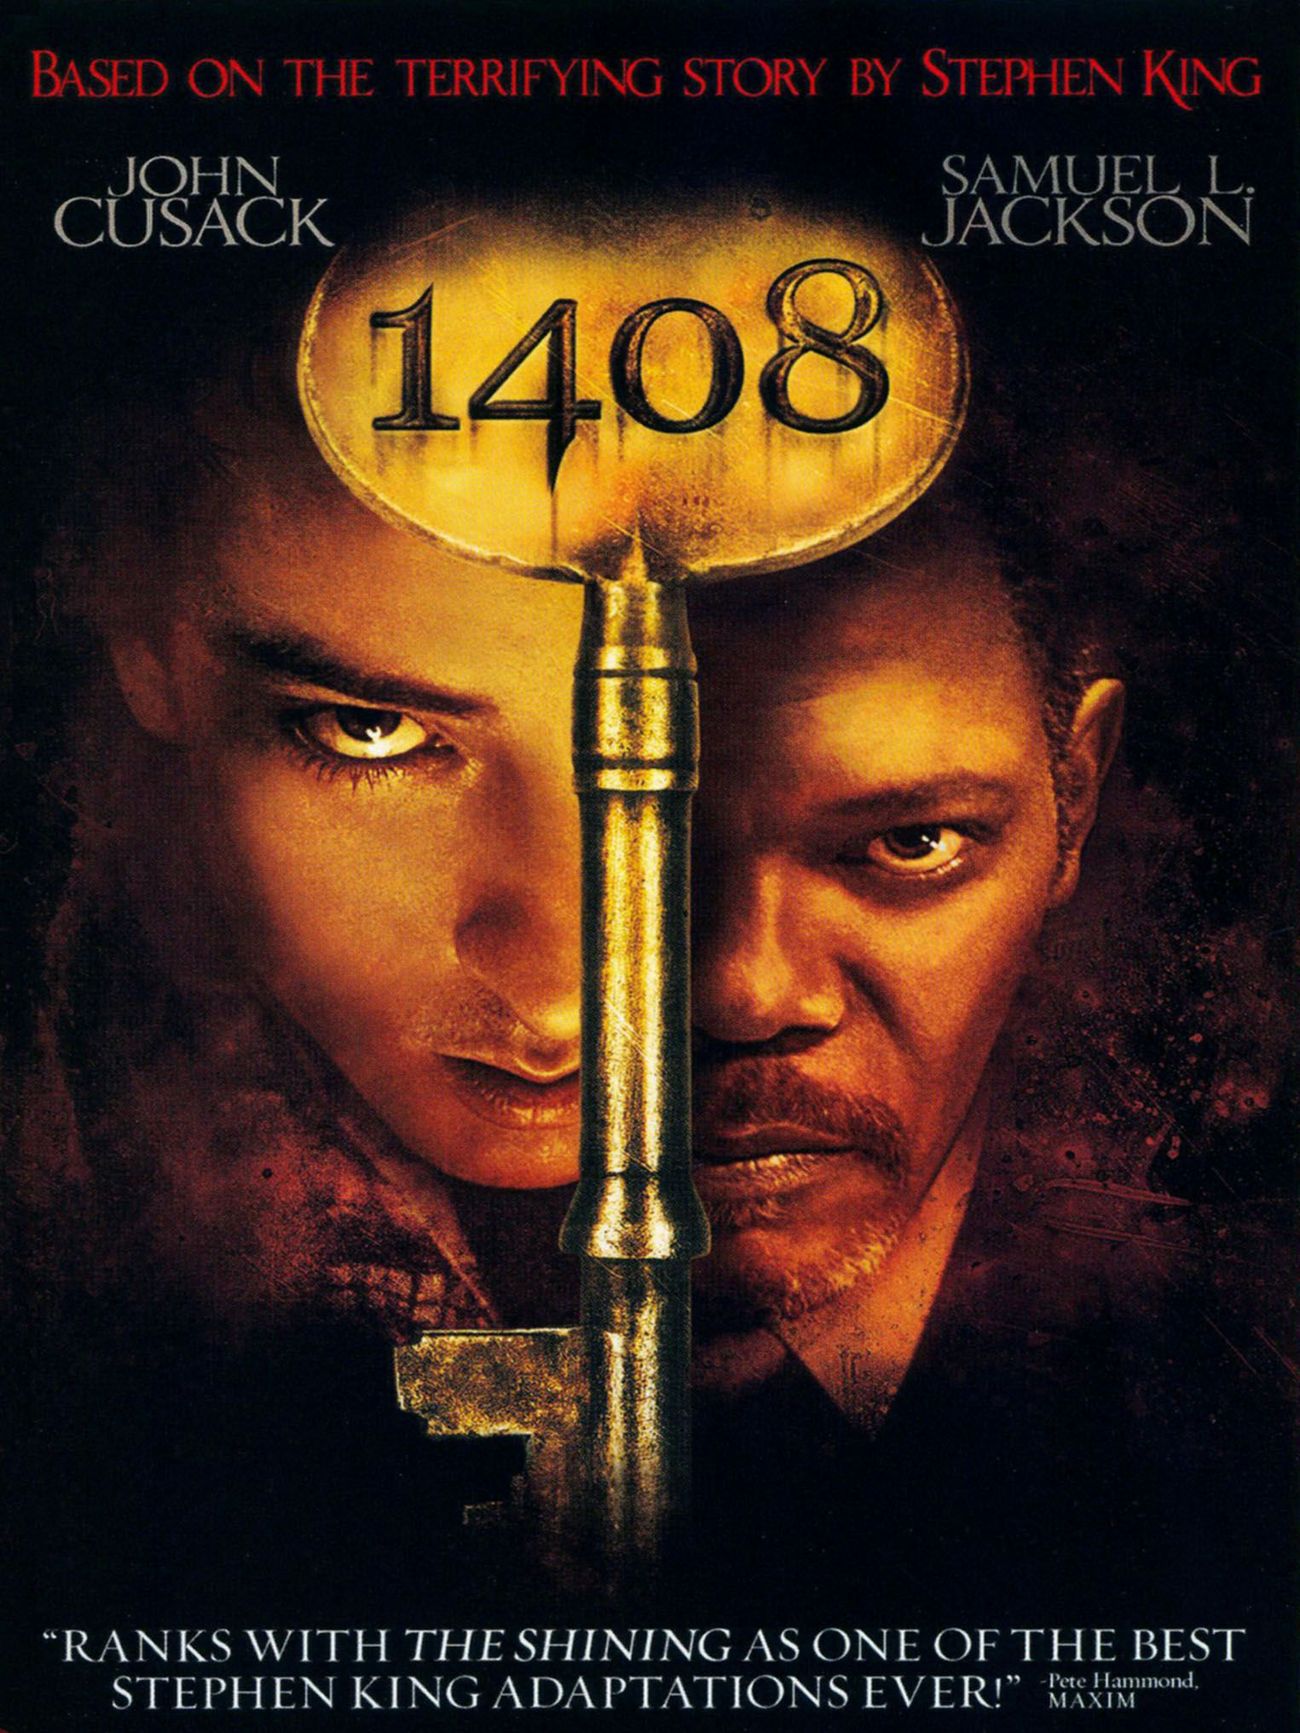 1408 horror movie review